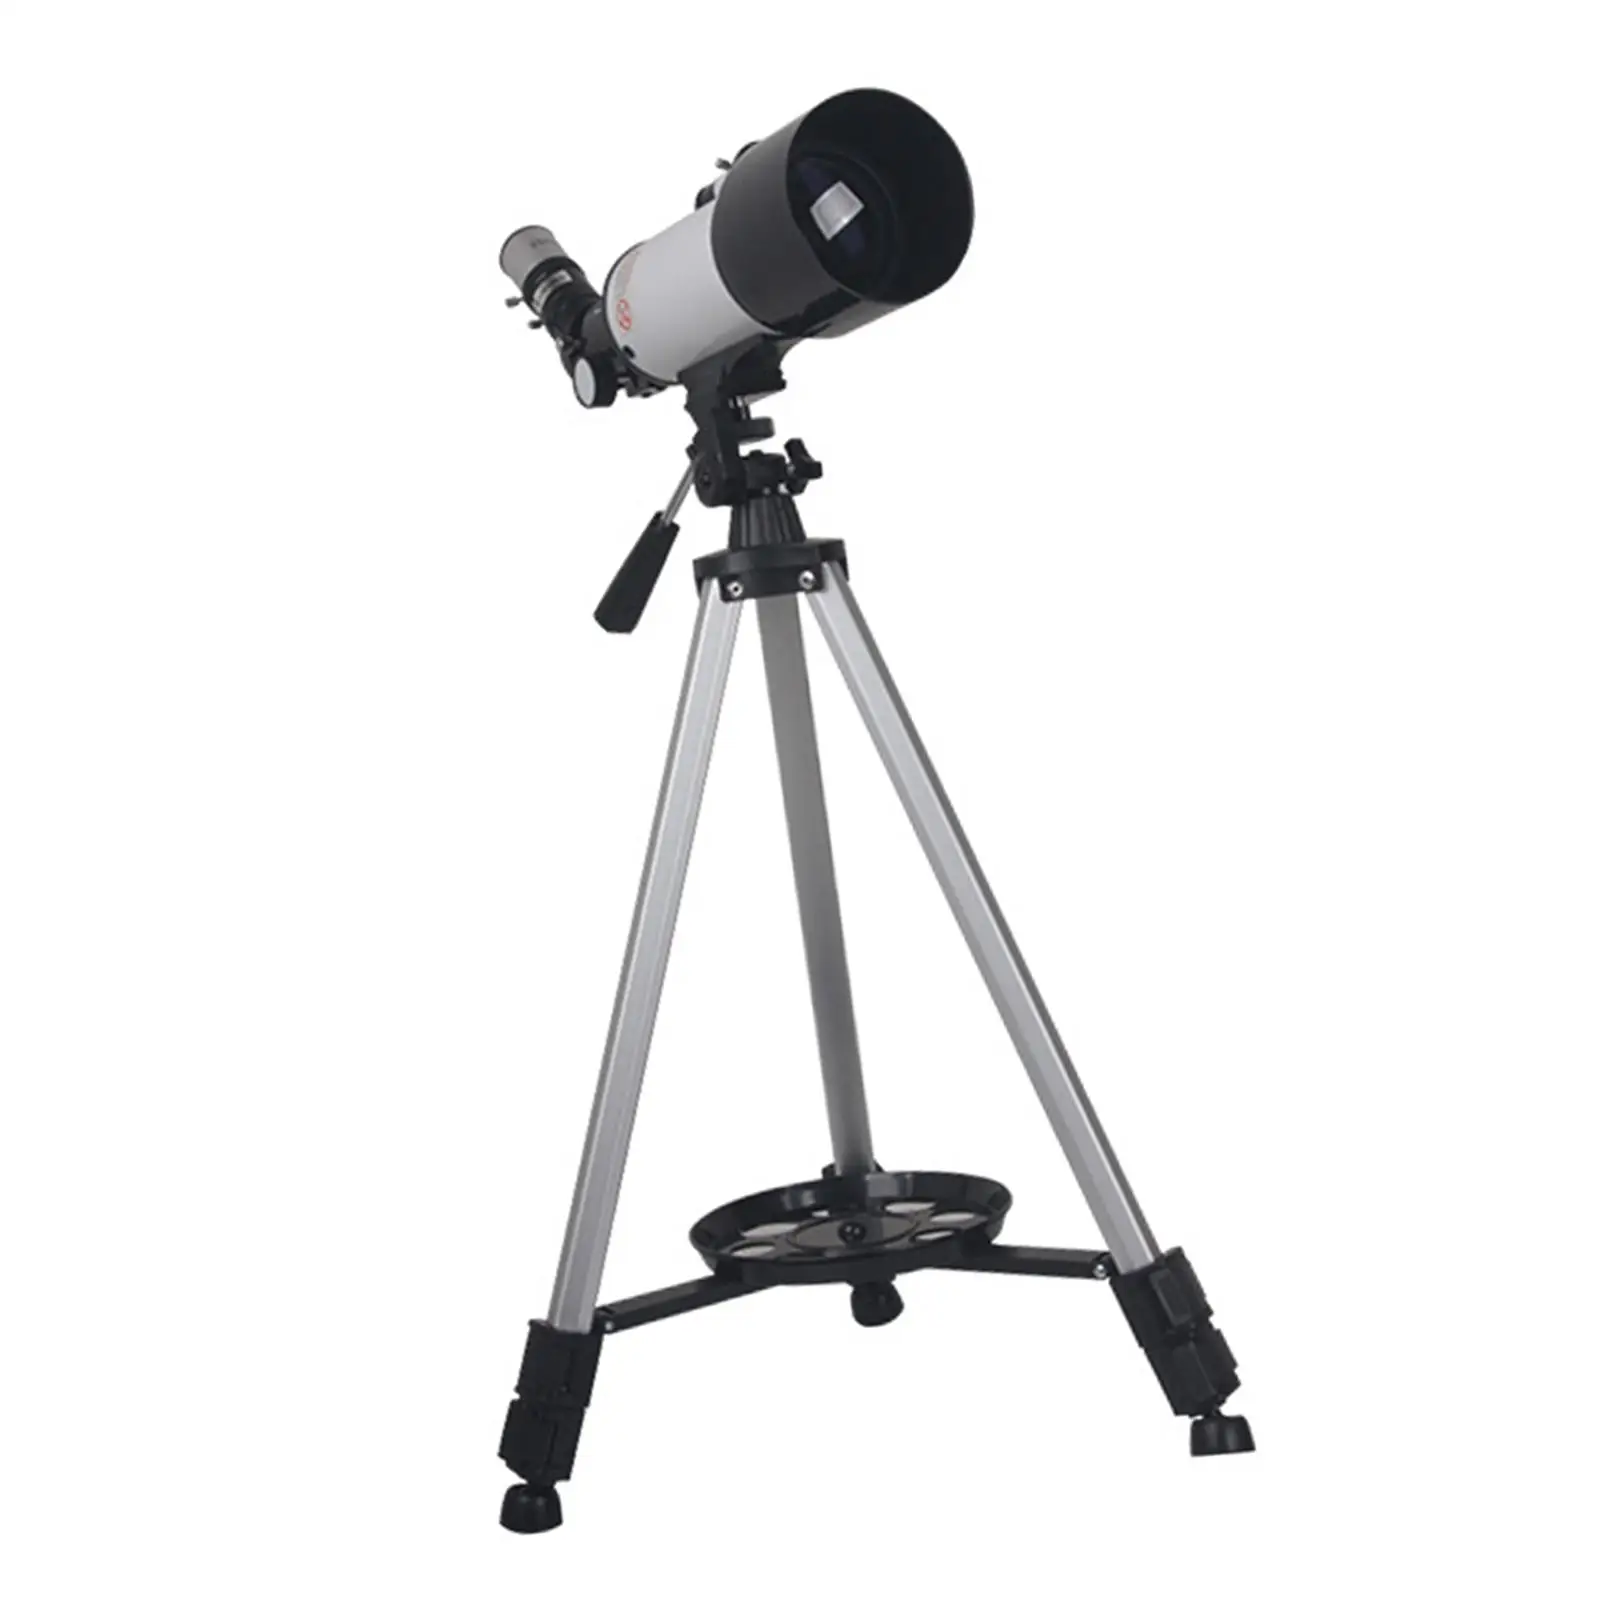 70mm 400mm Telescope with Tripod for Beginners for Wathcing Wildlife and